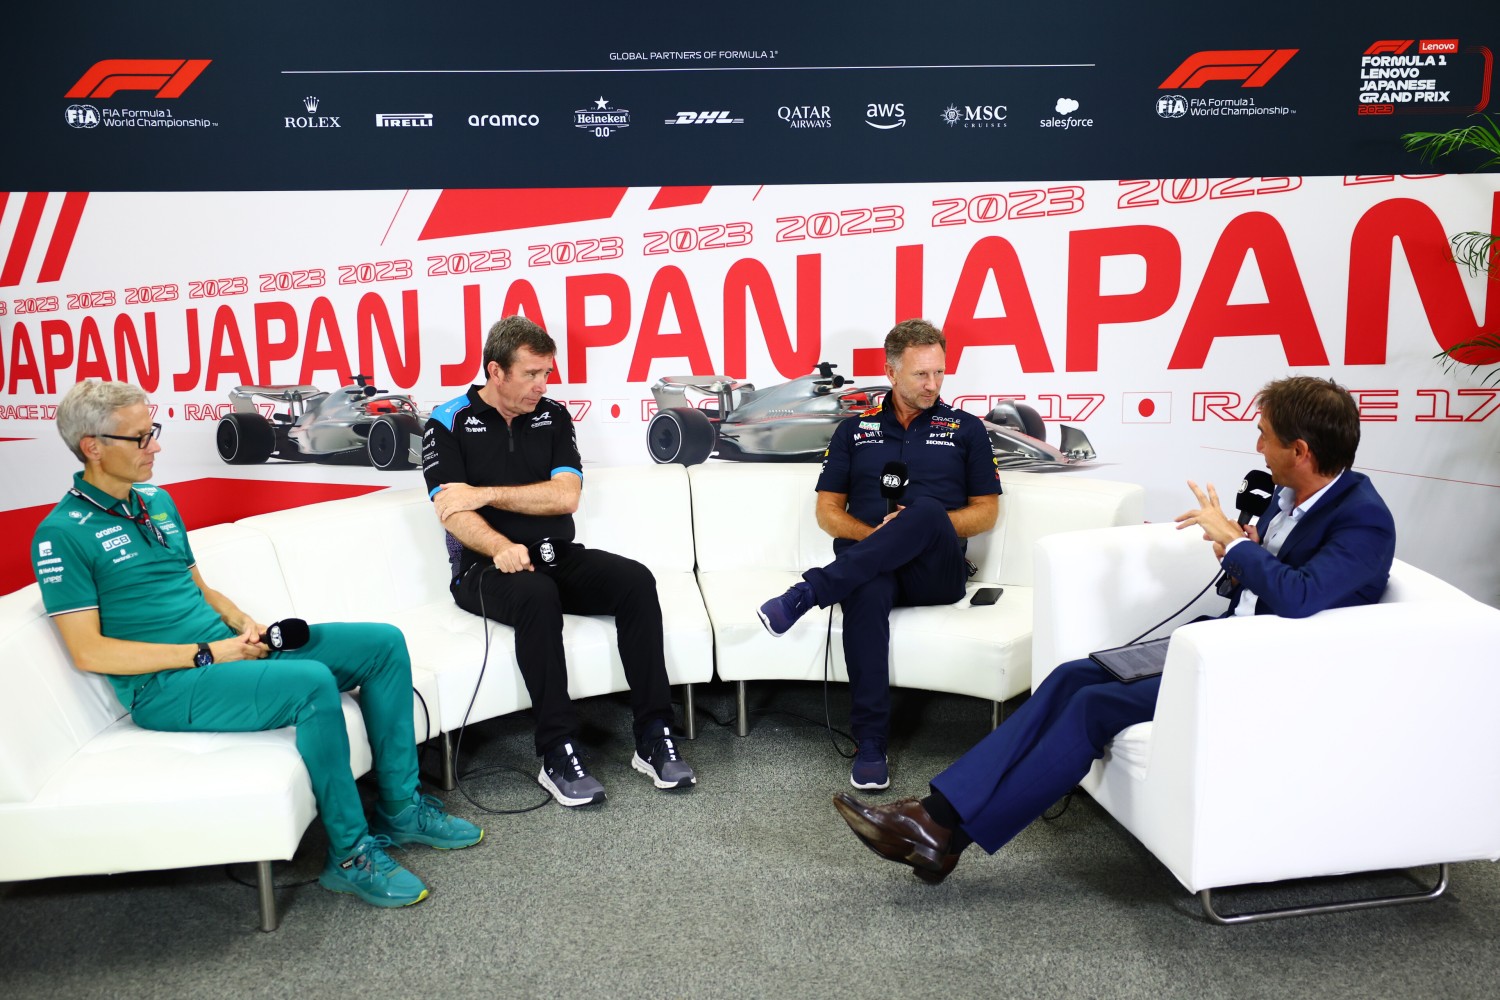 Mike Krack, Team Principal of the Aston Martin F1 Team, Bruno Famin, Interim Team Principal of Alpine F1 and Red Bull Racing Team Principal Christian Horner attend the Team Principals Press Conference during practice ahead of the F1 Grand Prix of Japan at Suzuka International Racing Course on September 22, 2023 in Suzuka, Japan. (Photo by Dan Istitene/Getty Images) // Getty Images / Red Bull Content Pool